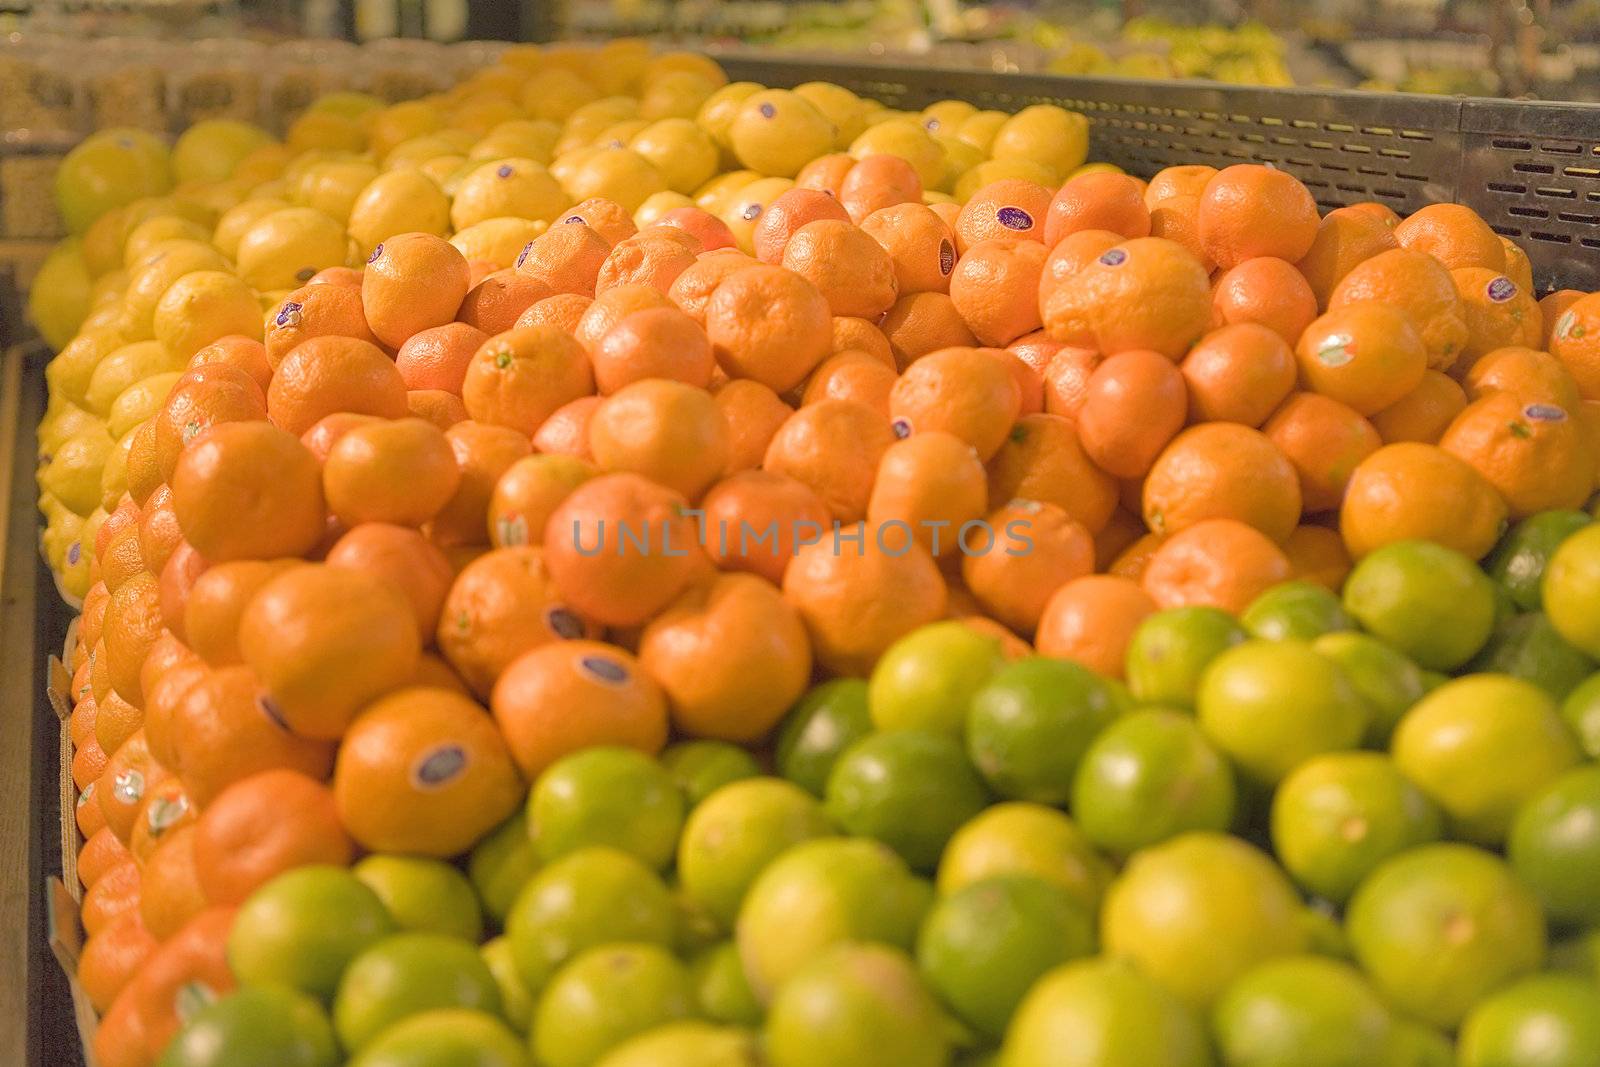 A display of fruits in a Grocery Store with Lemona,Tangerines and Limes.